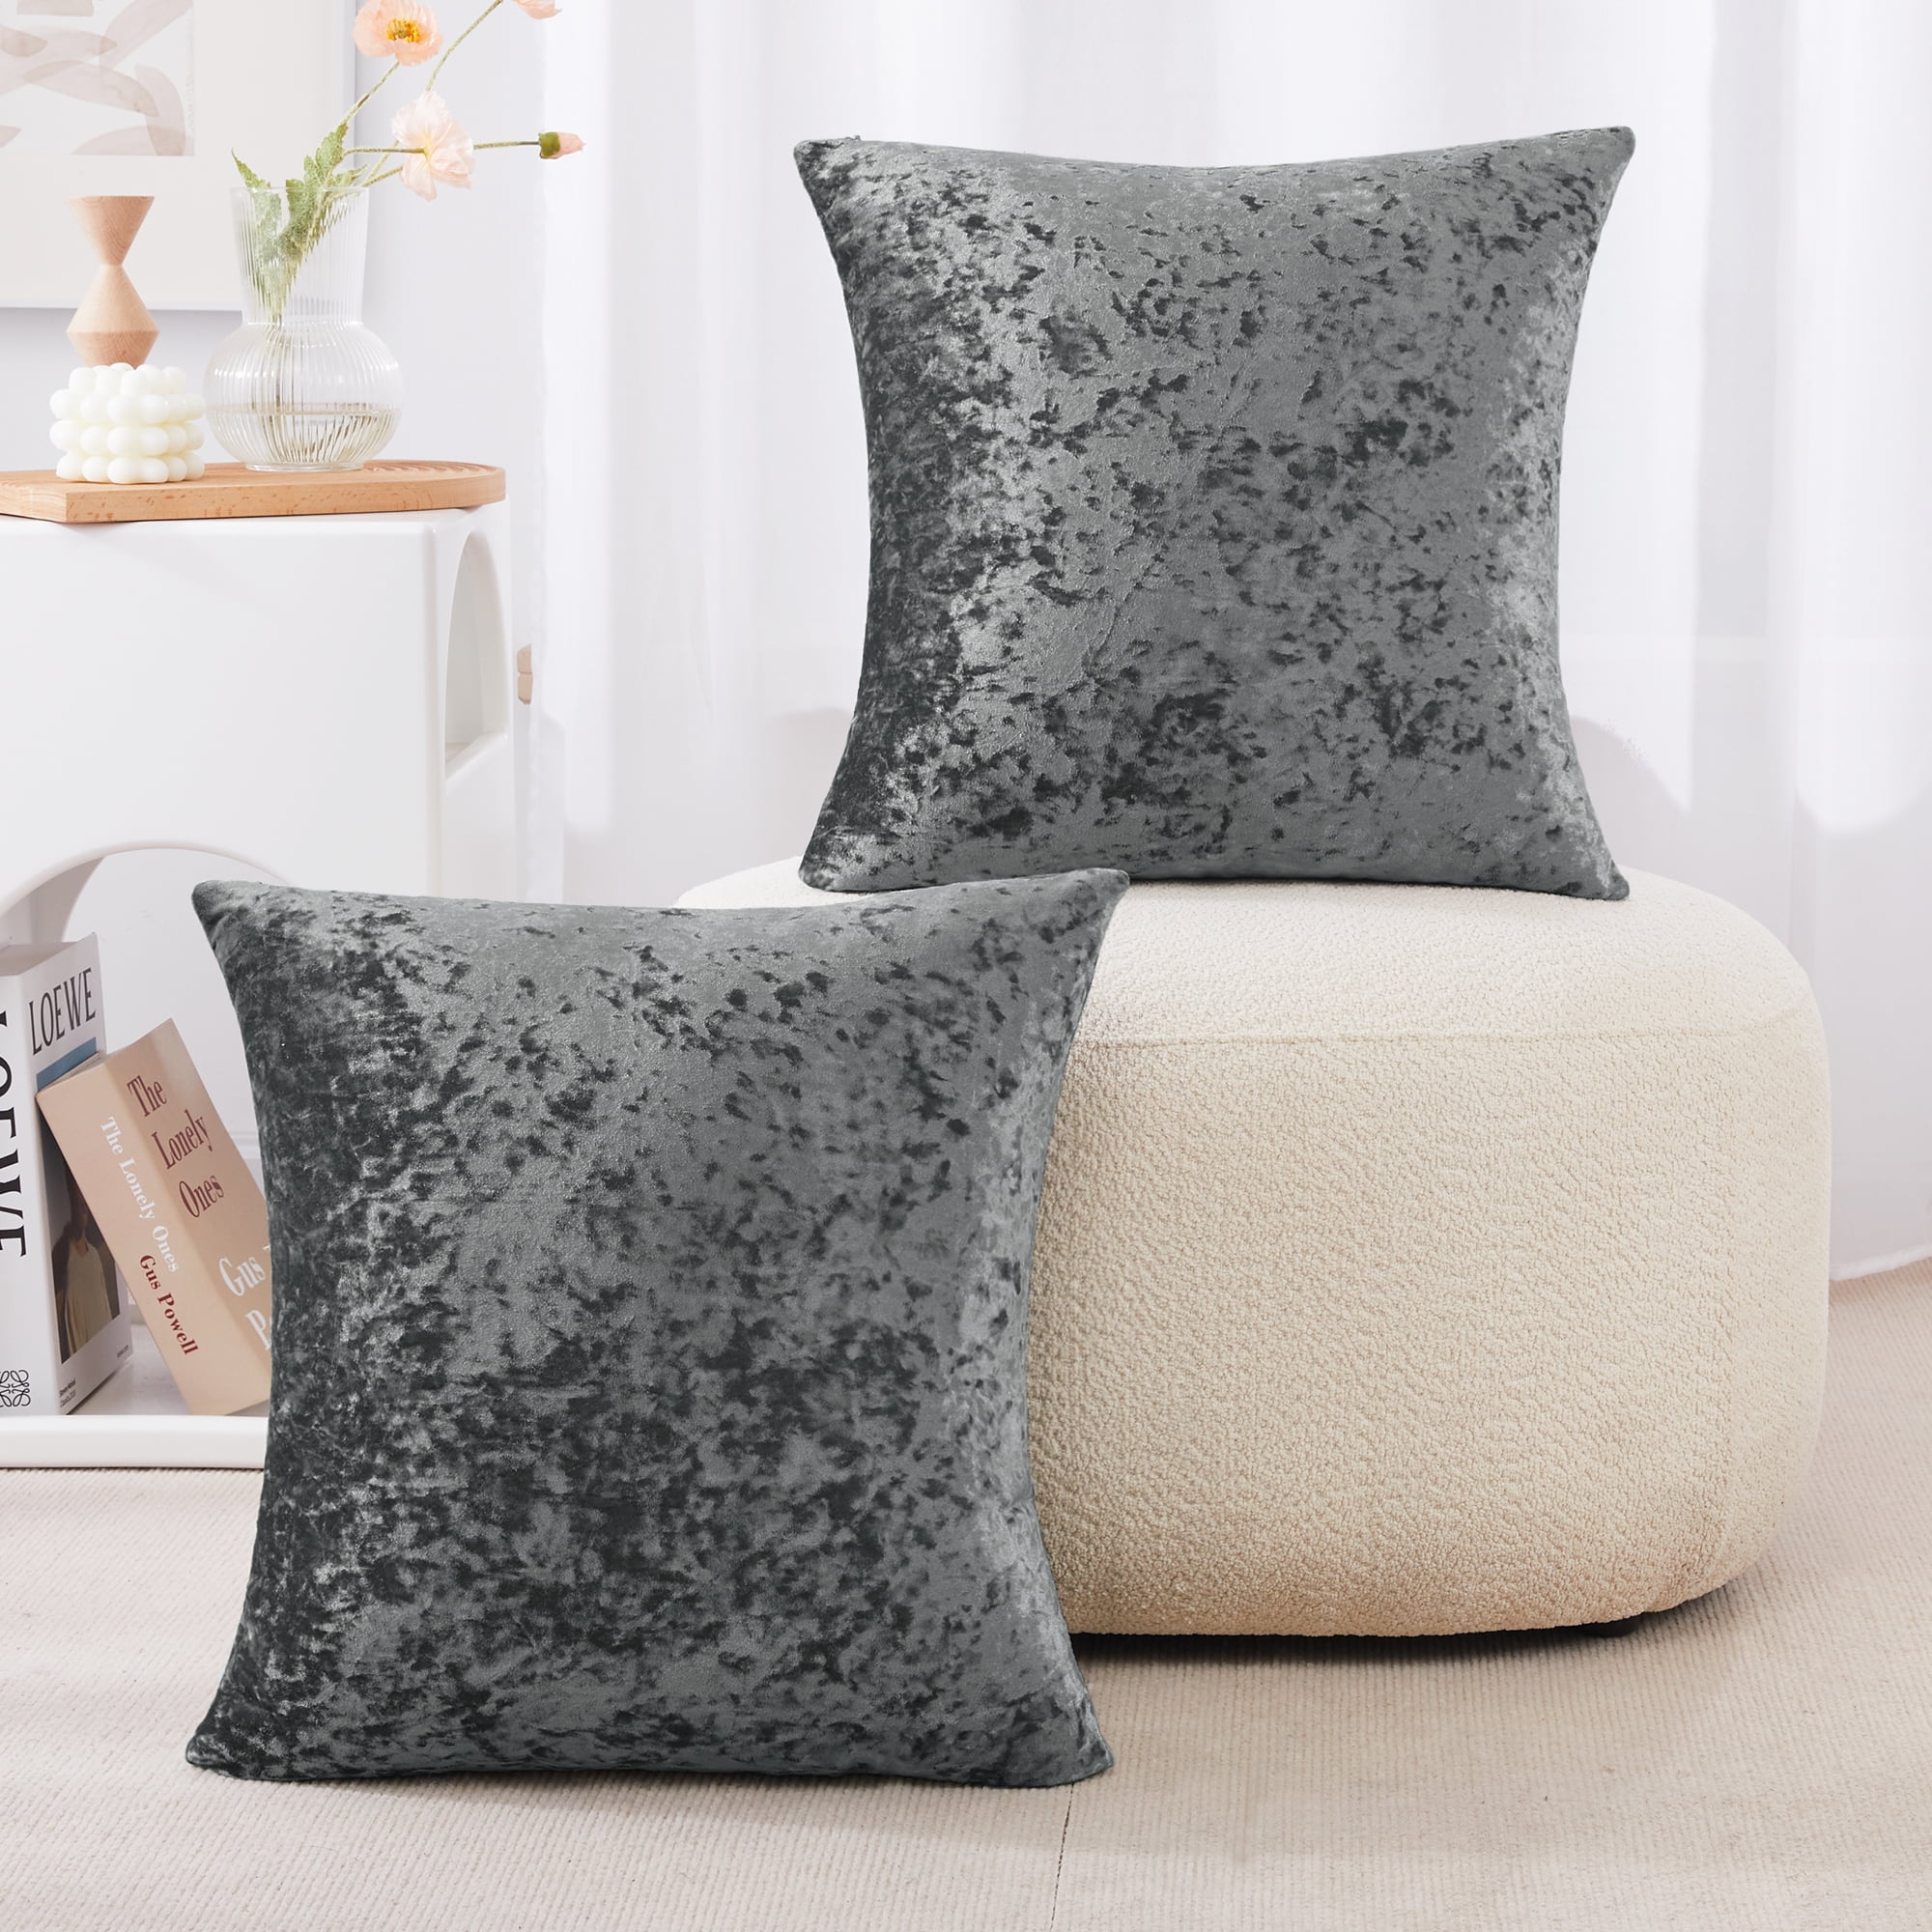 Top Finel Square Decorative Throw Pillow Covers Soft Velvet Outdoor Cushion Covers 18x18 with Balls for Sofa Bed, Set of 2, Cream